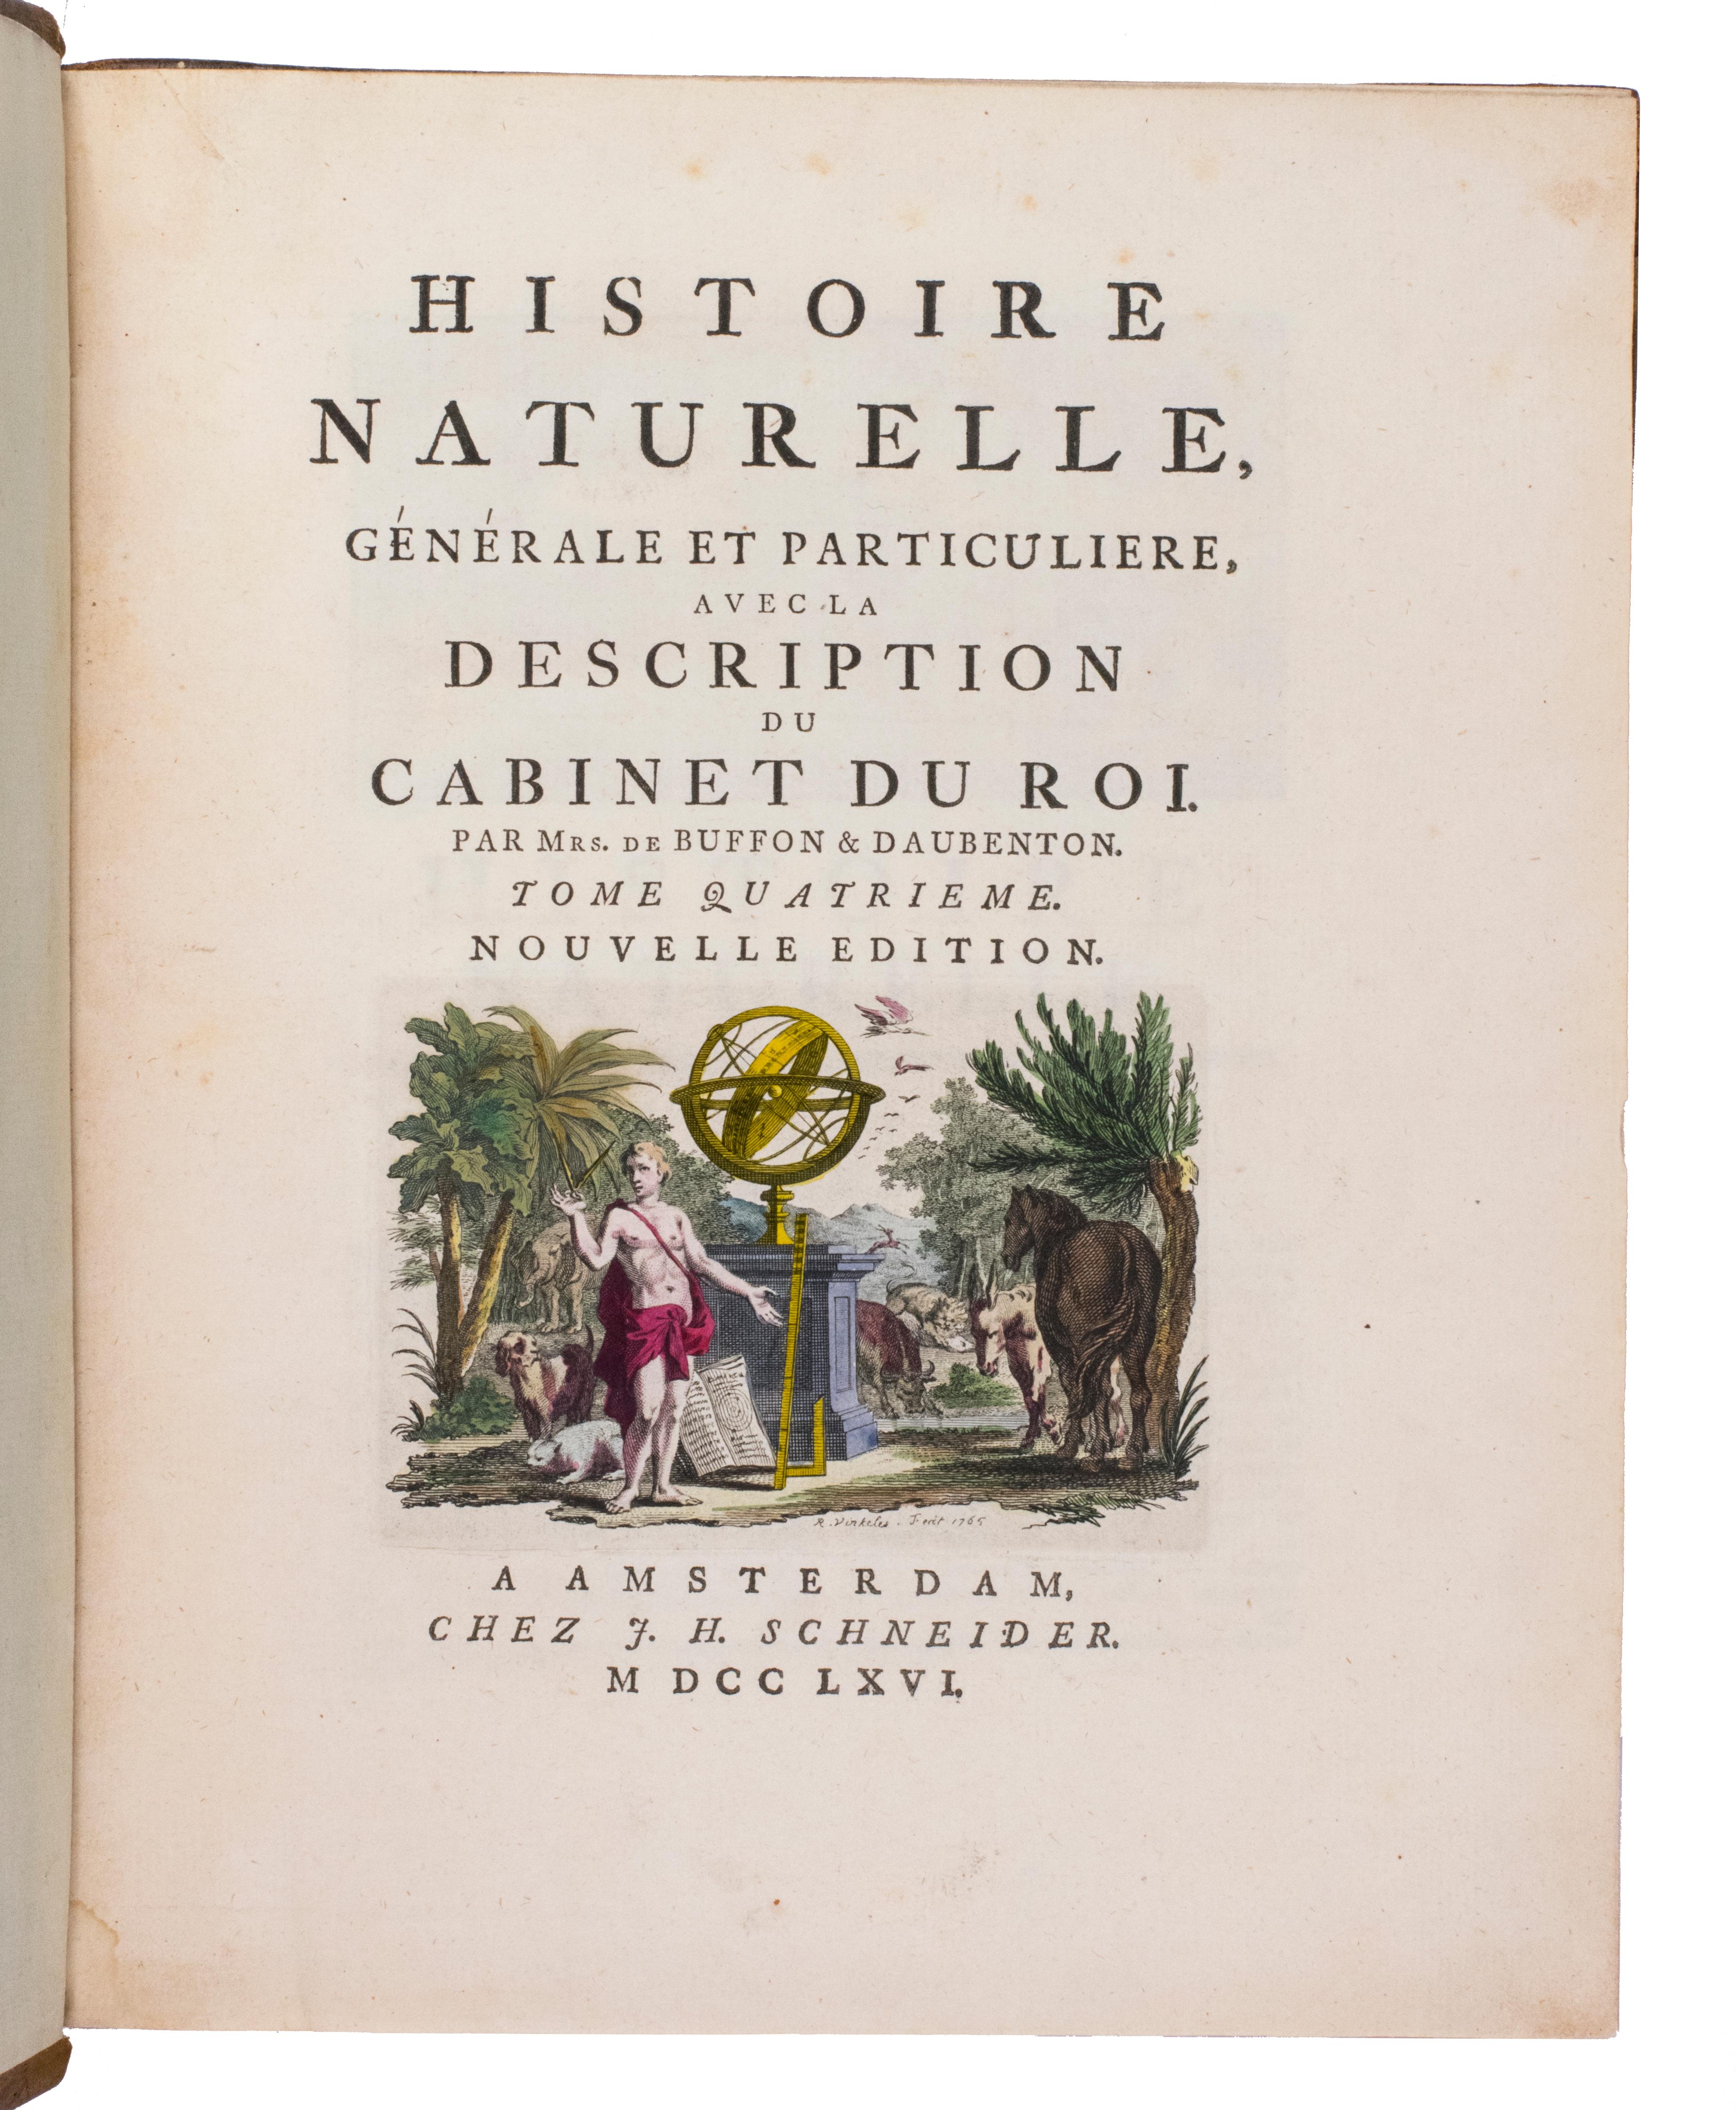 Hand-coloured set of Buffon’s Histoire naturelle in its most luxurious form For Sale 12